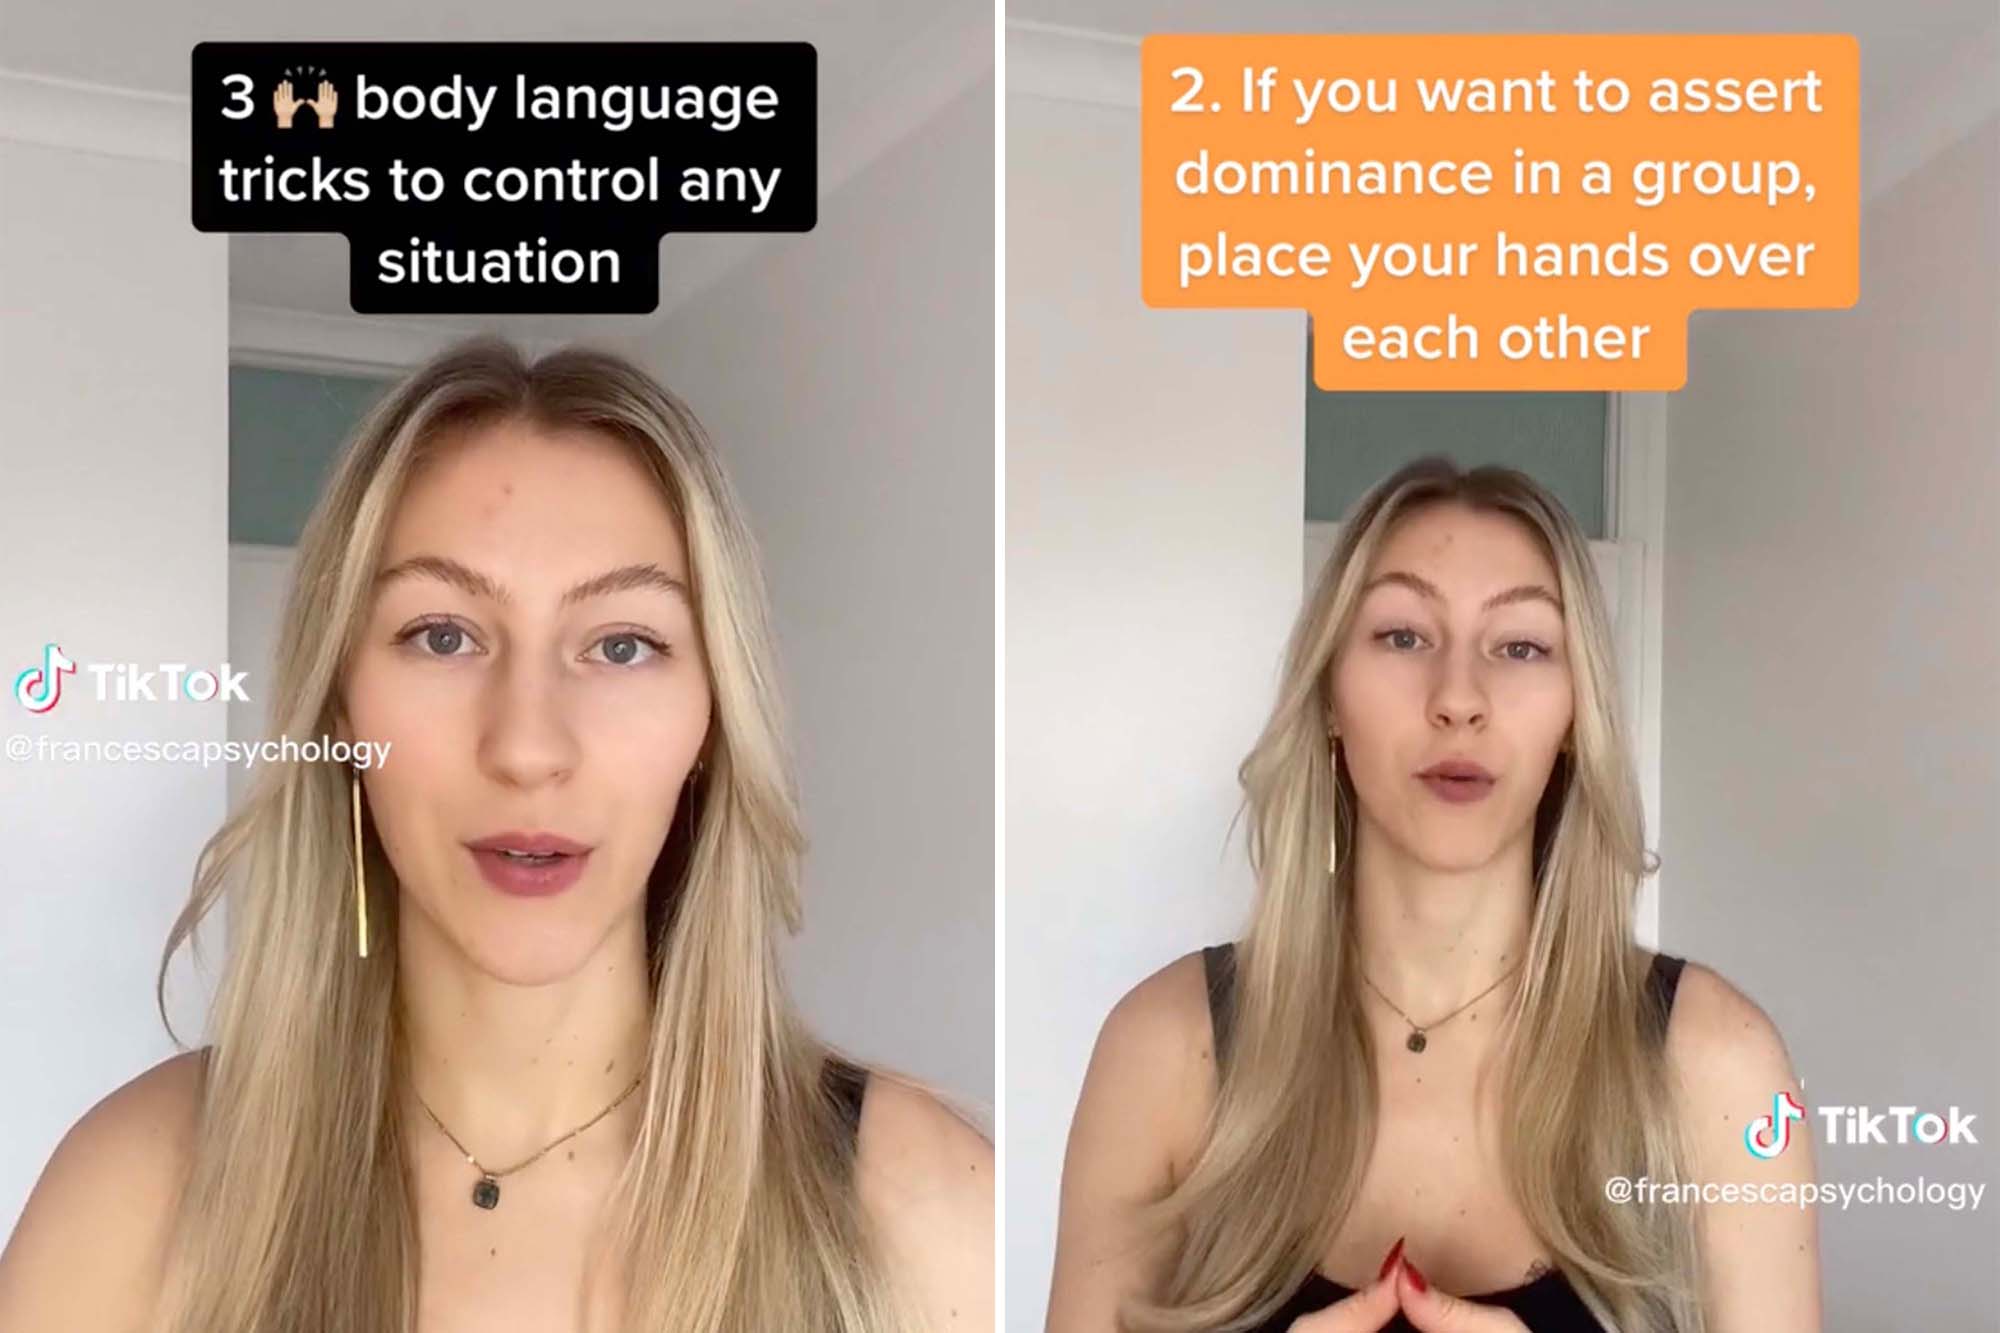 How to Control Body Language?